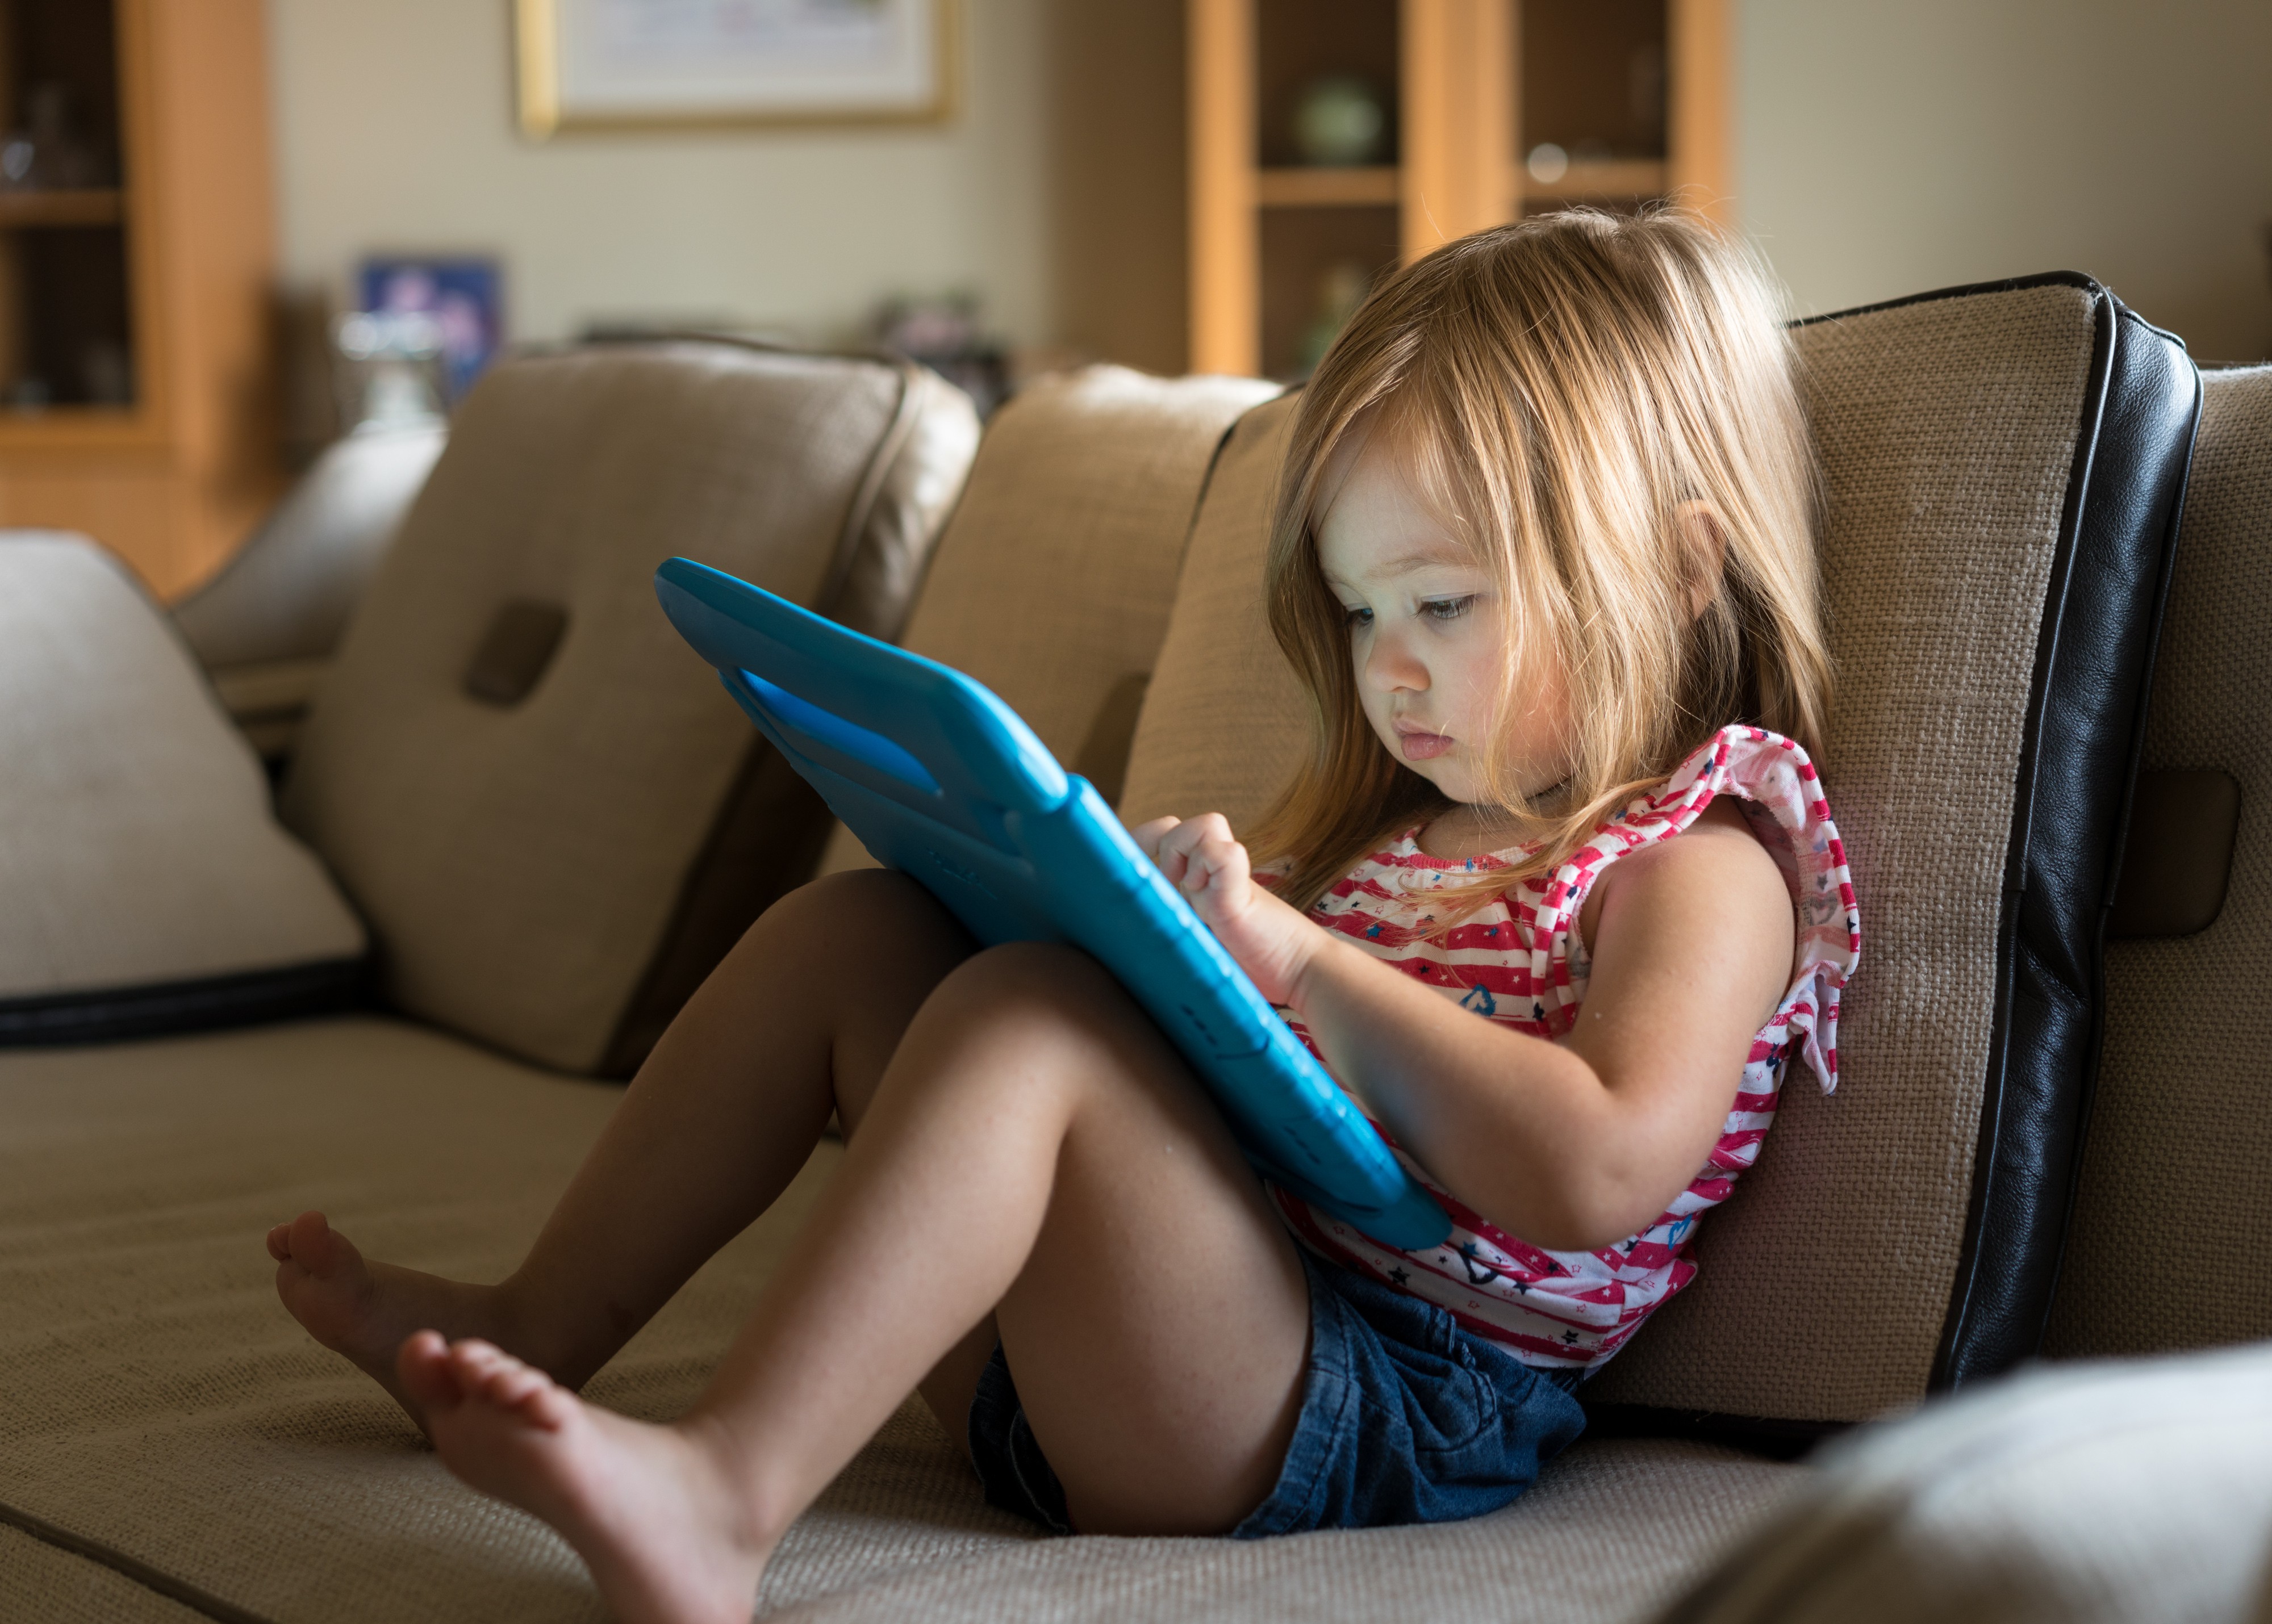 Experts differ on whether letting young children use electronic devices is good or bad. Photo: Alamy